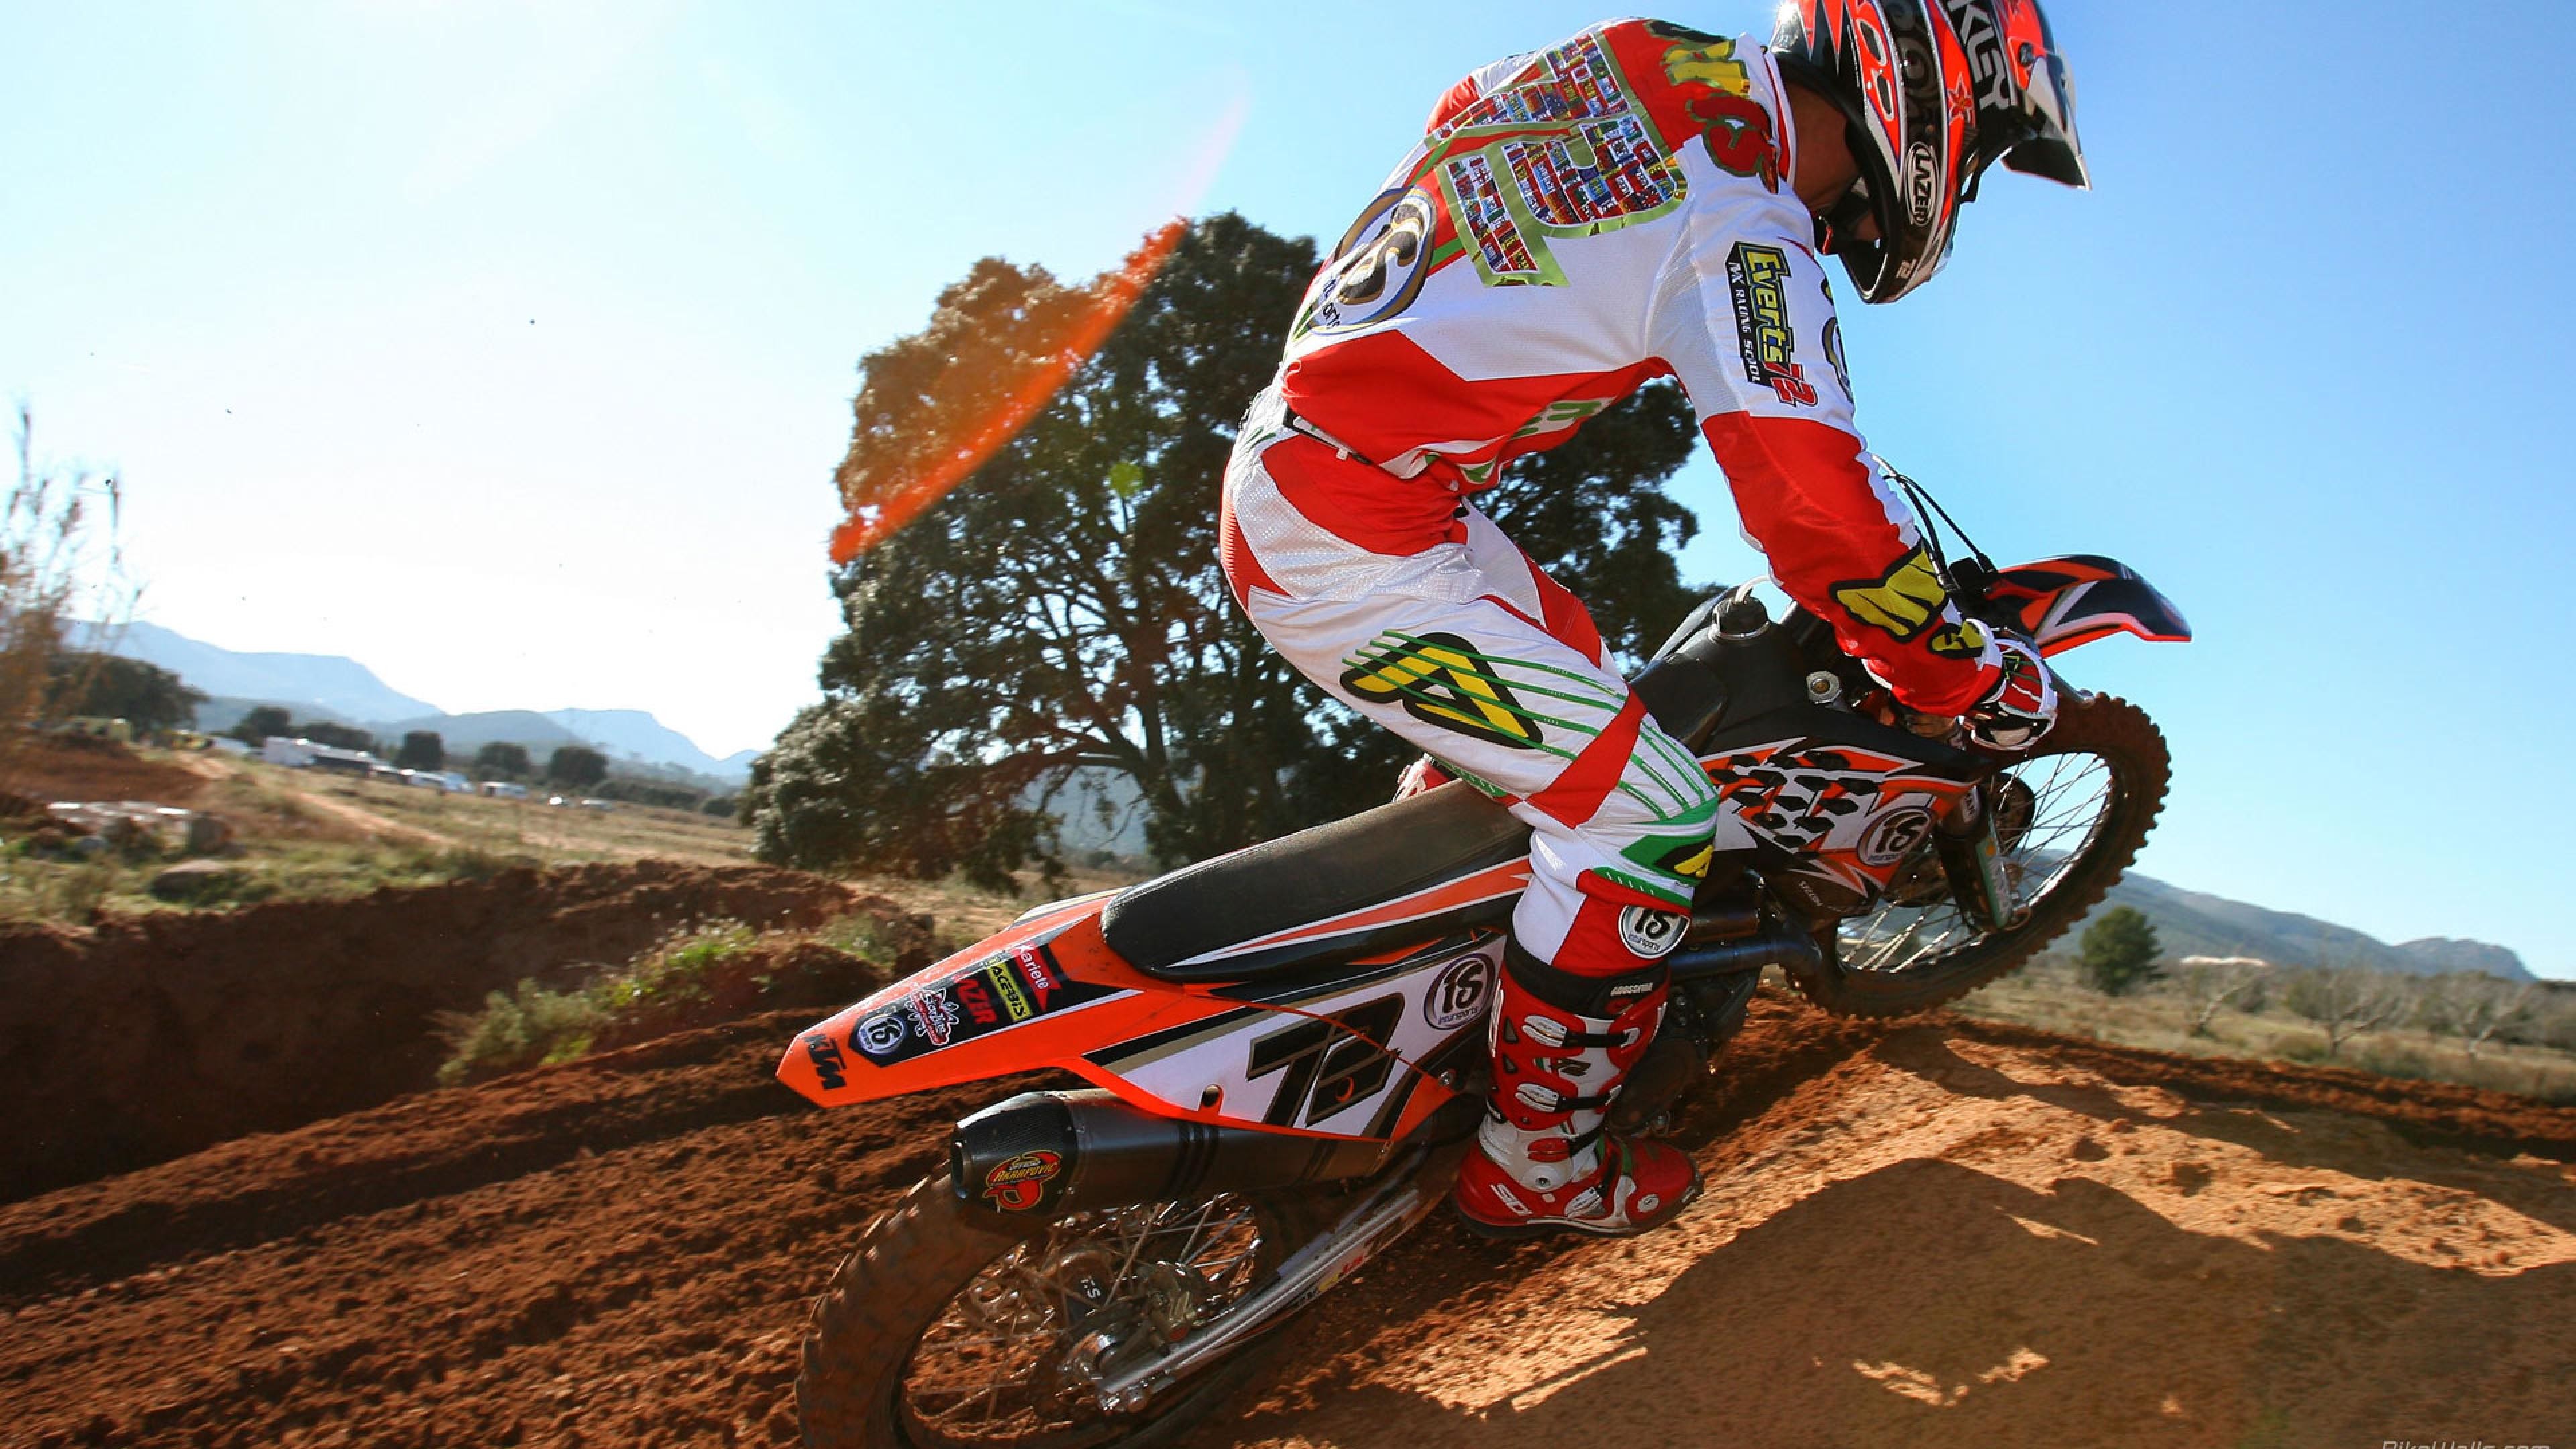 3840x2160 Free Download Motocross Ktm Picture.